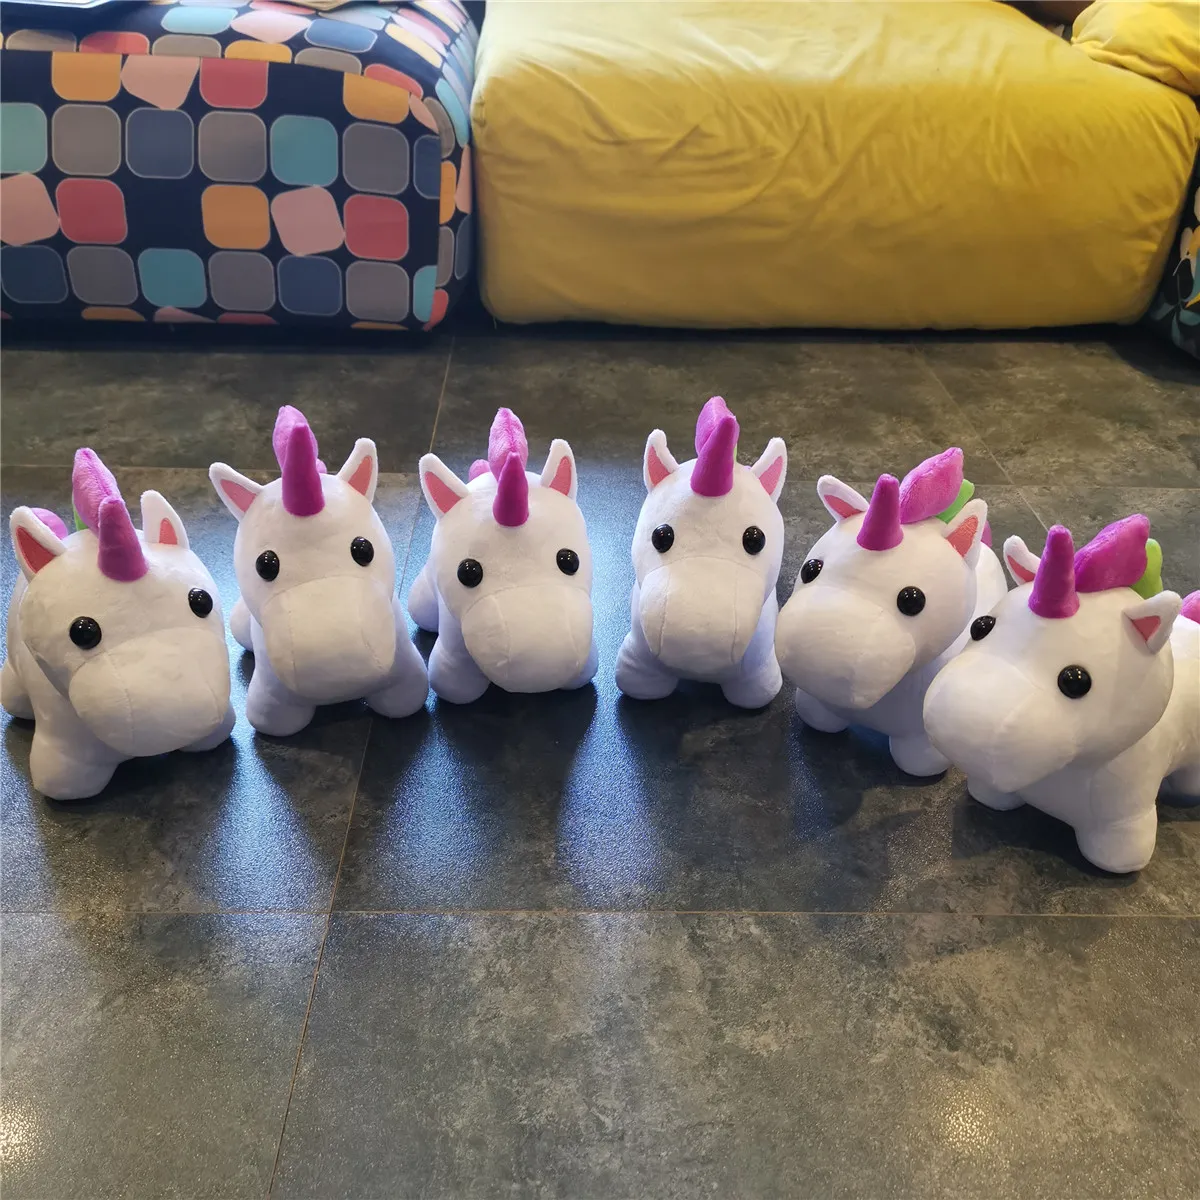 Robloxing Adopt Me Toys Plush Unicorn Pets Animal Jugetes 10 Inches Game Peluche Action Figures Cute Stuffed Dolls301E